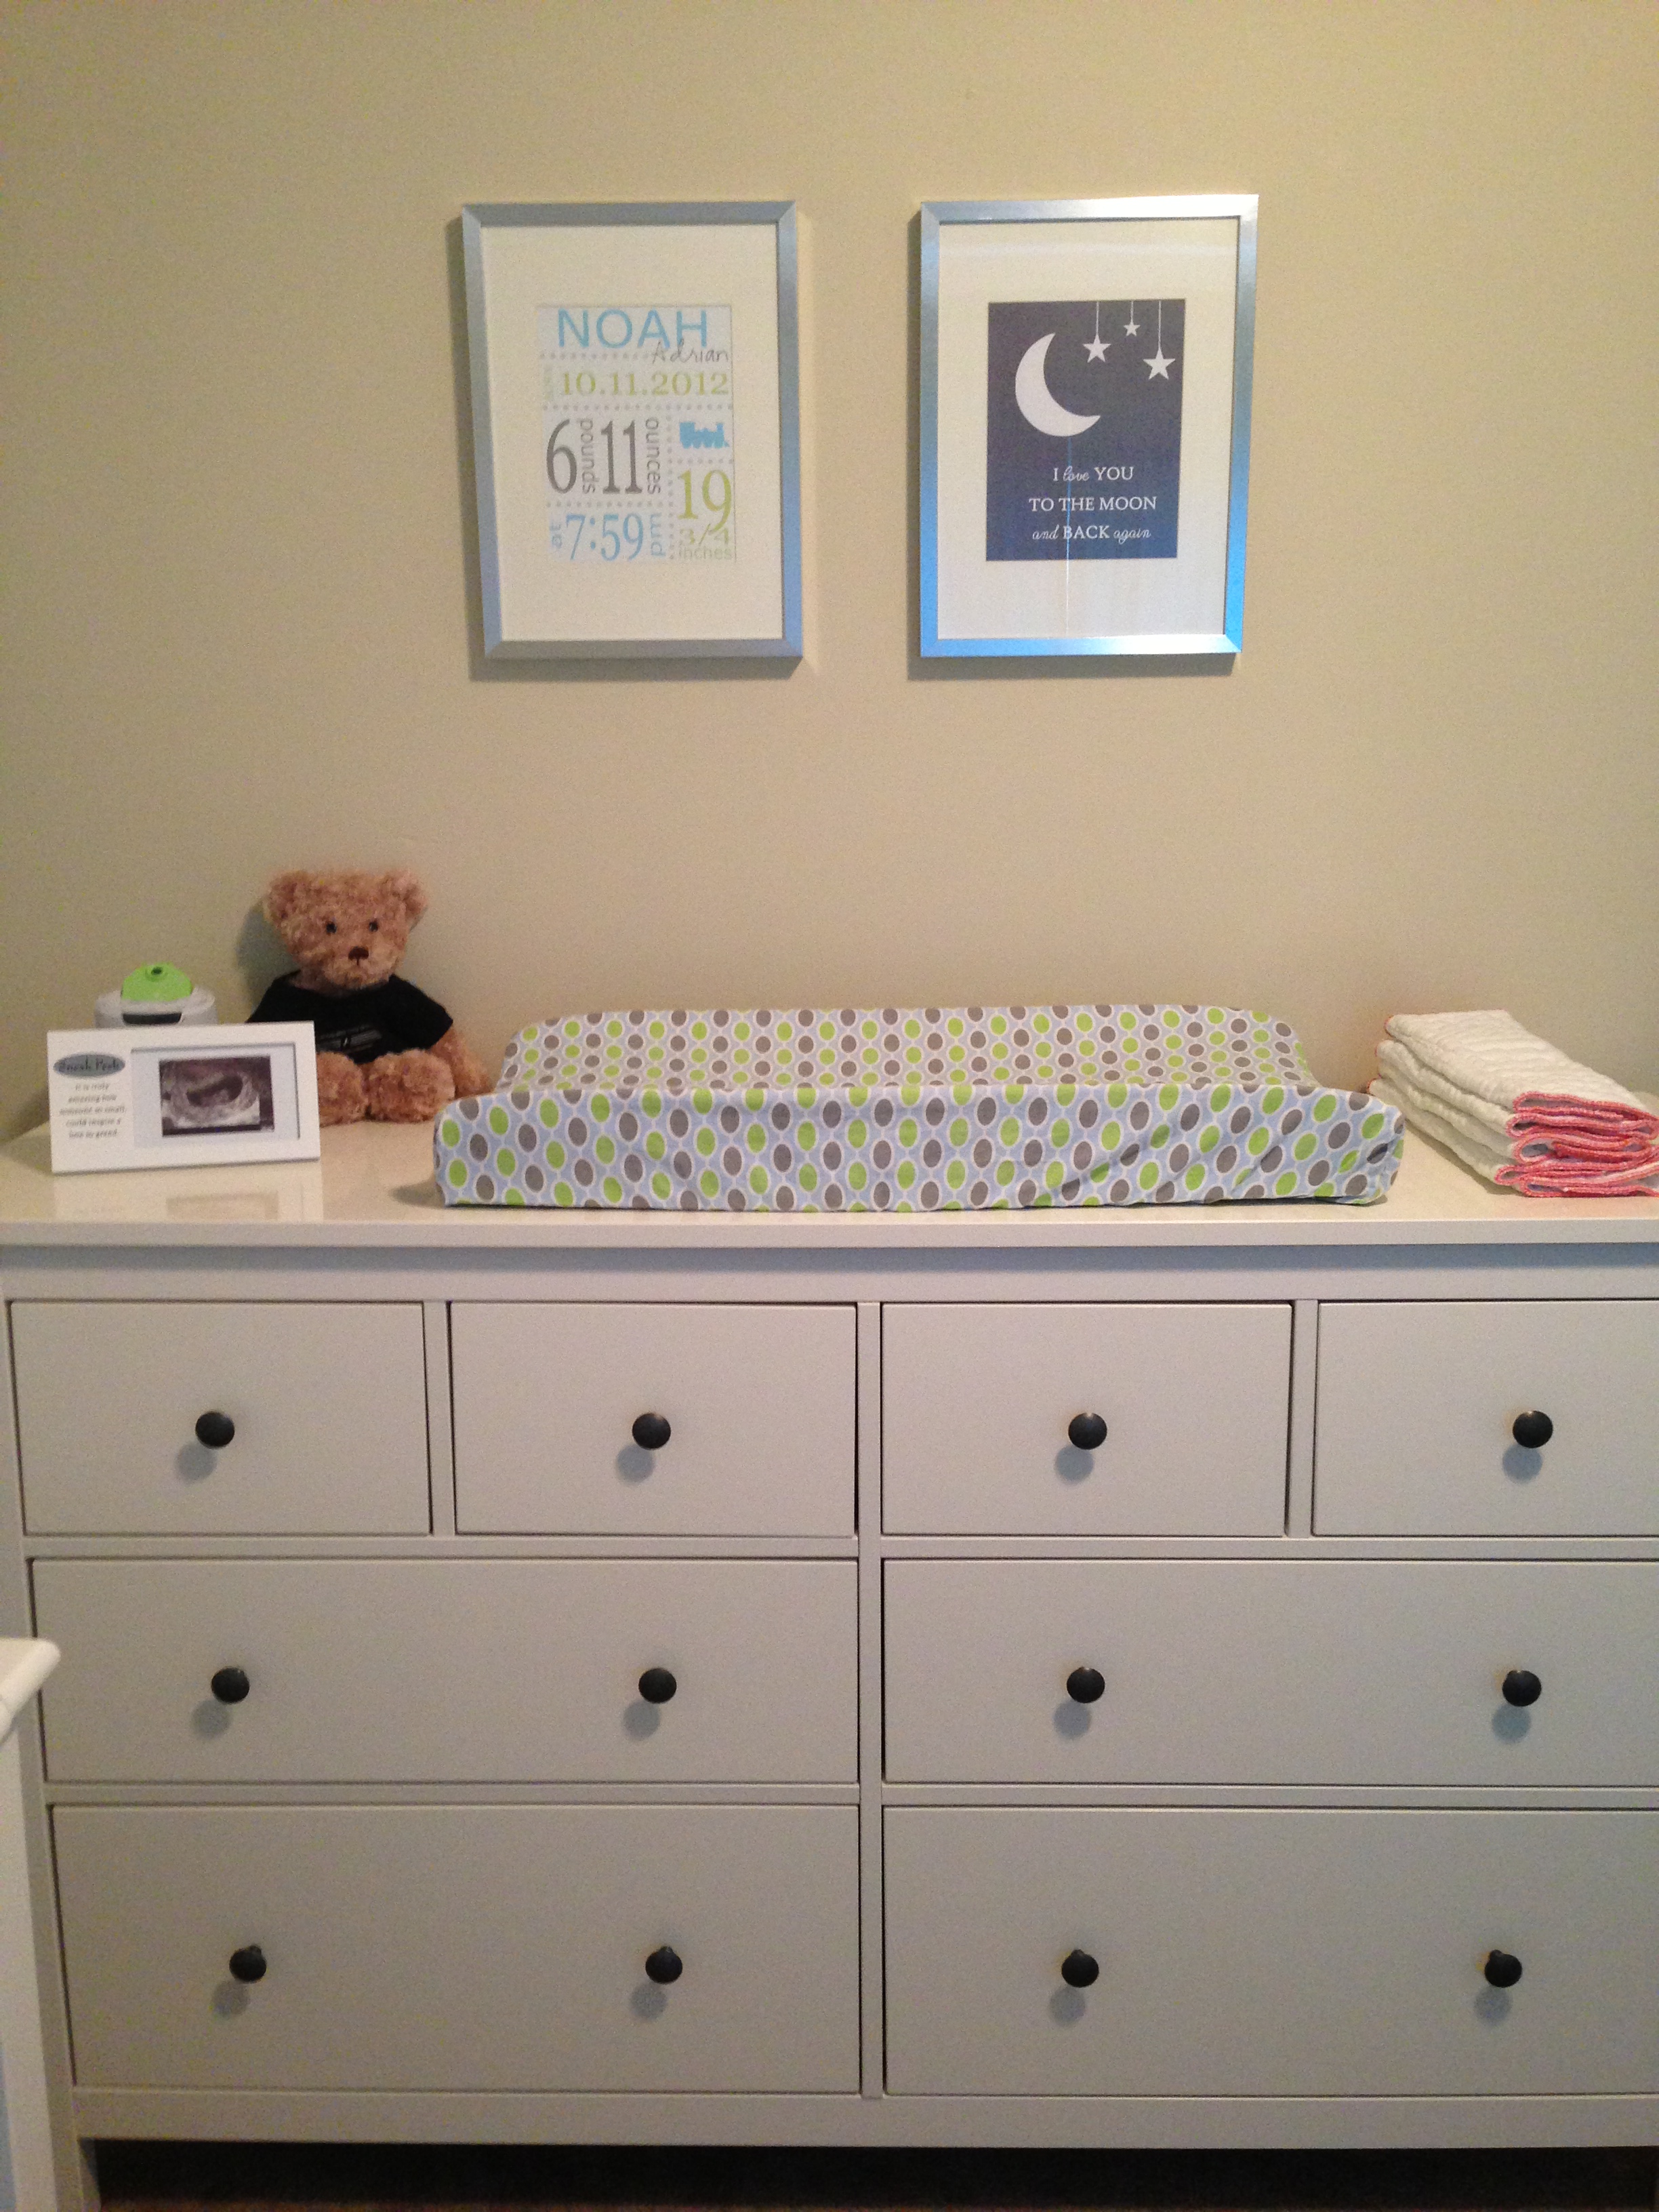 changing table topper for ikea dresser